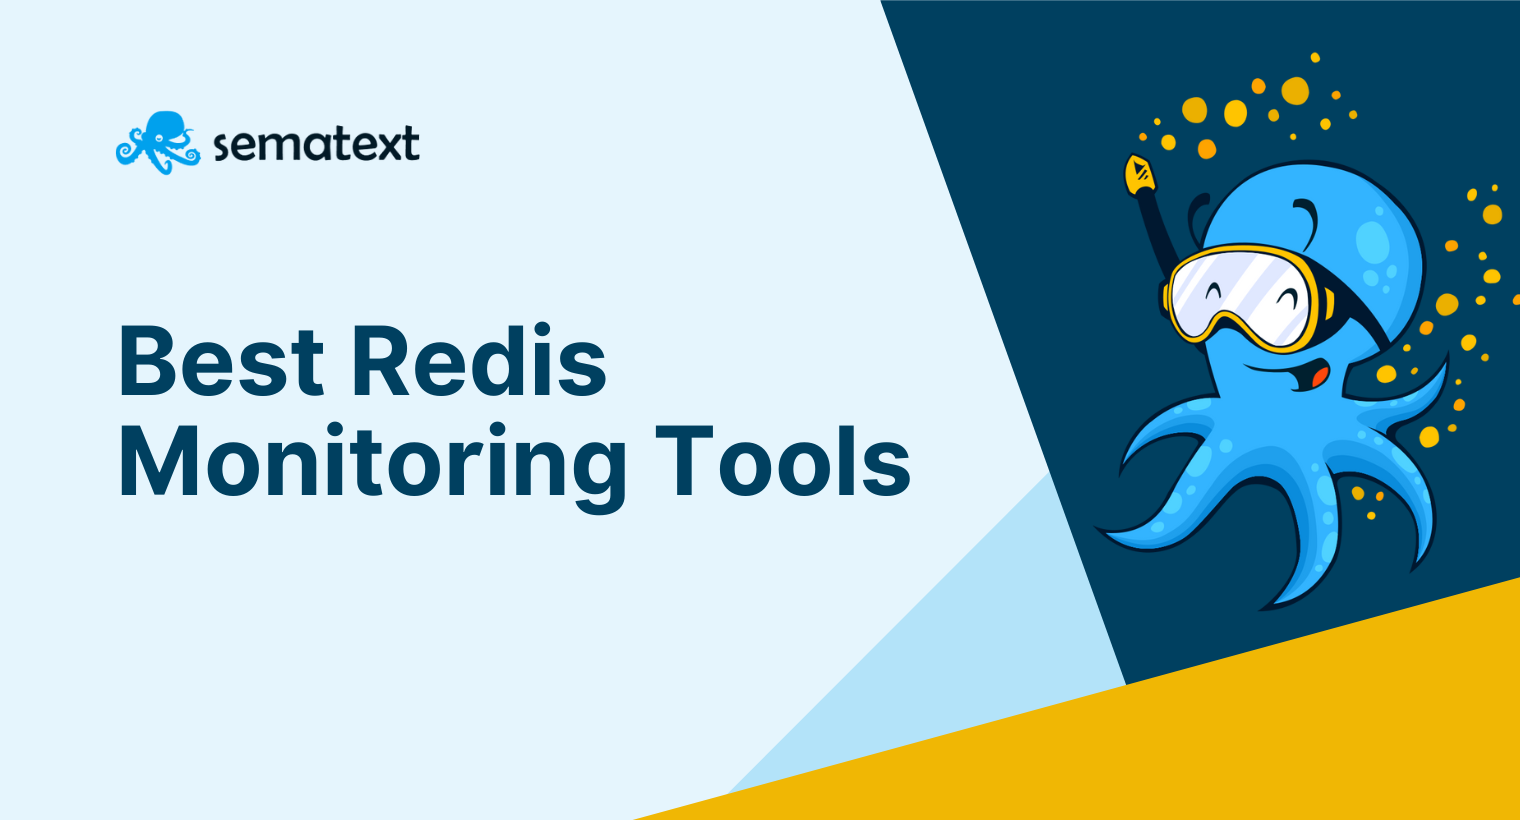 11 Best Redis Monitoring Tools [2022 Review]